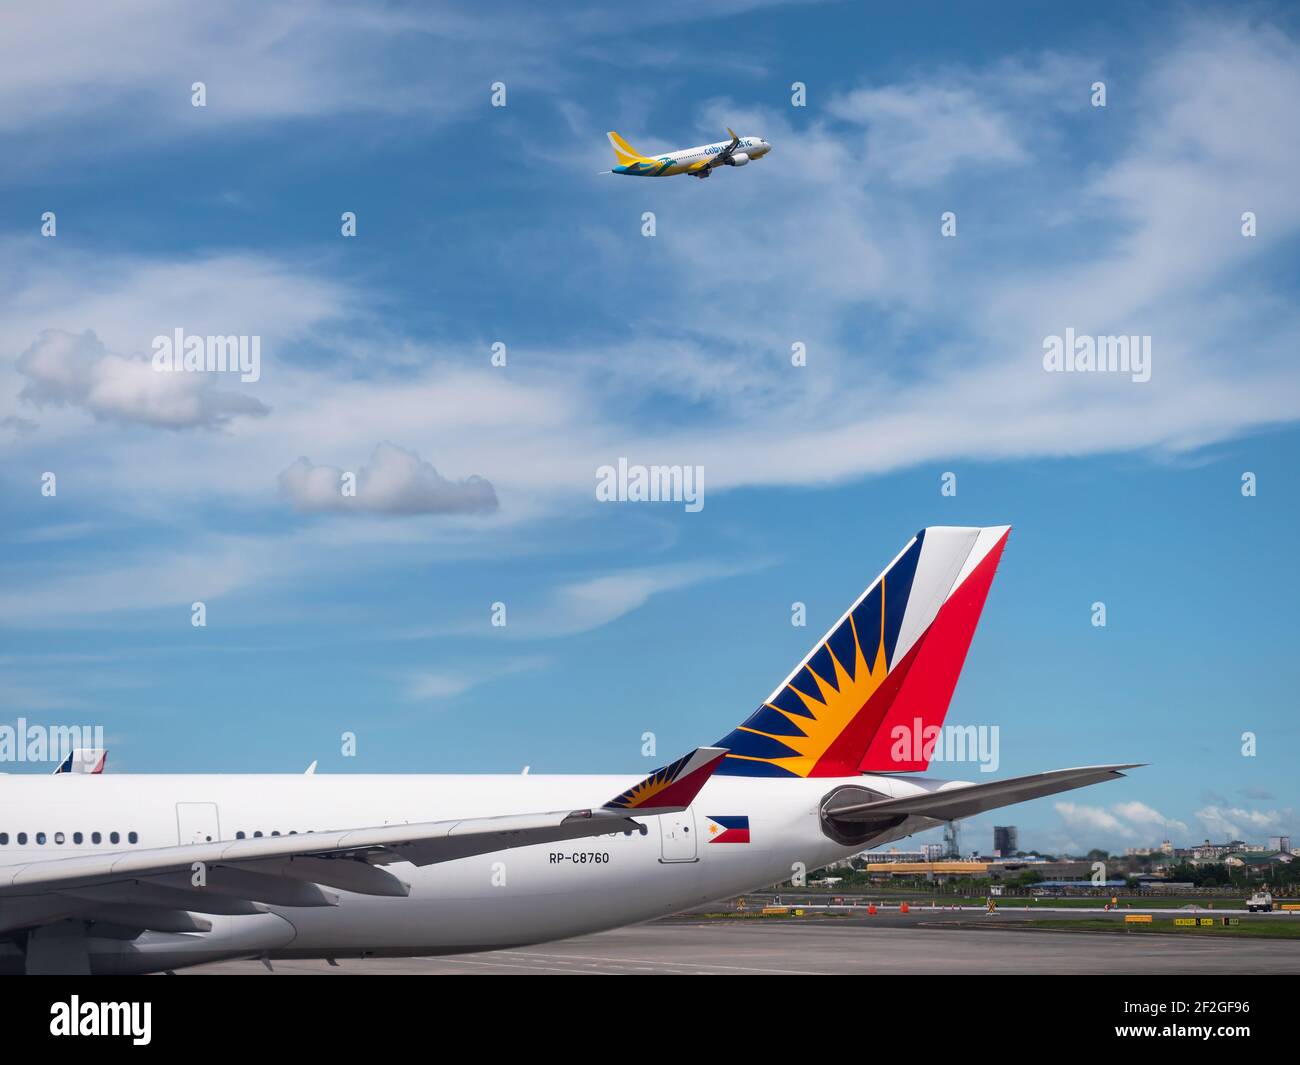 Philippine Airlines Airbus A330 at Terminal 2 of Ninoy Aquino International Airport in Manila, with Cebu Pacific Airbus A320 flying above. Stock Photo